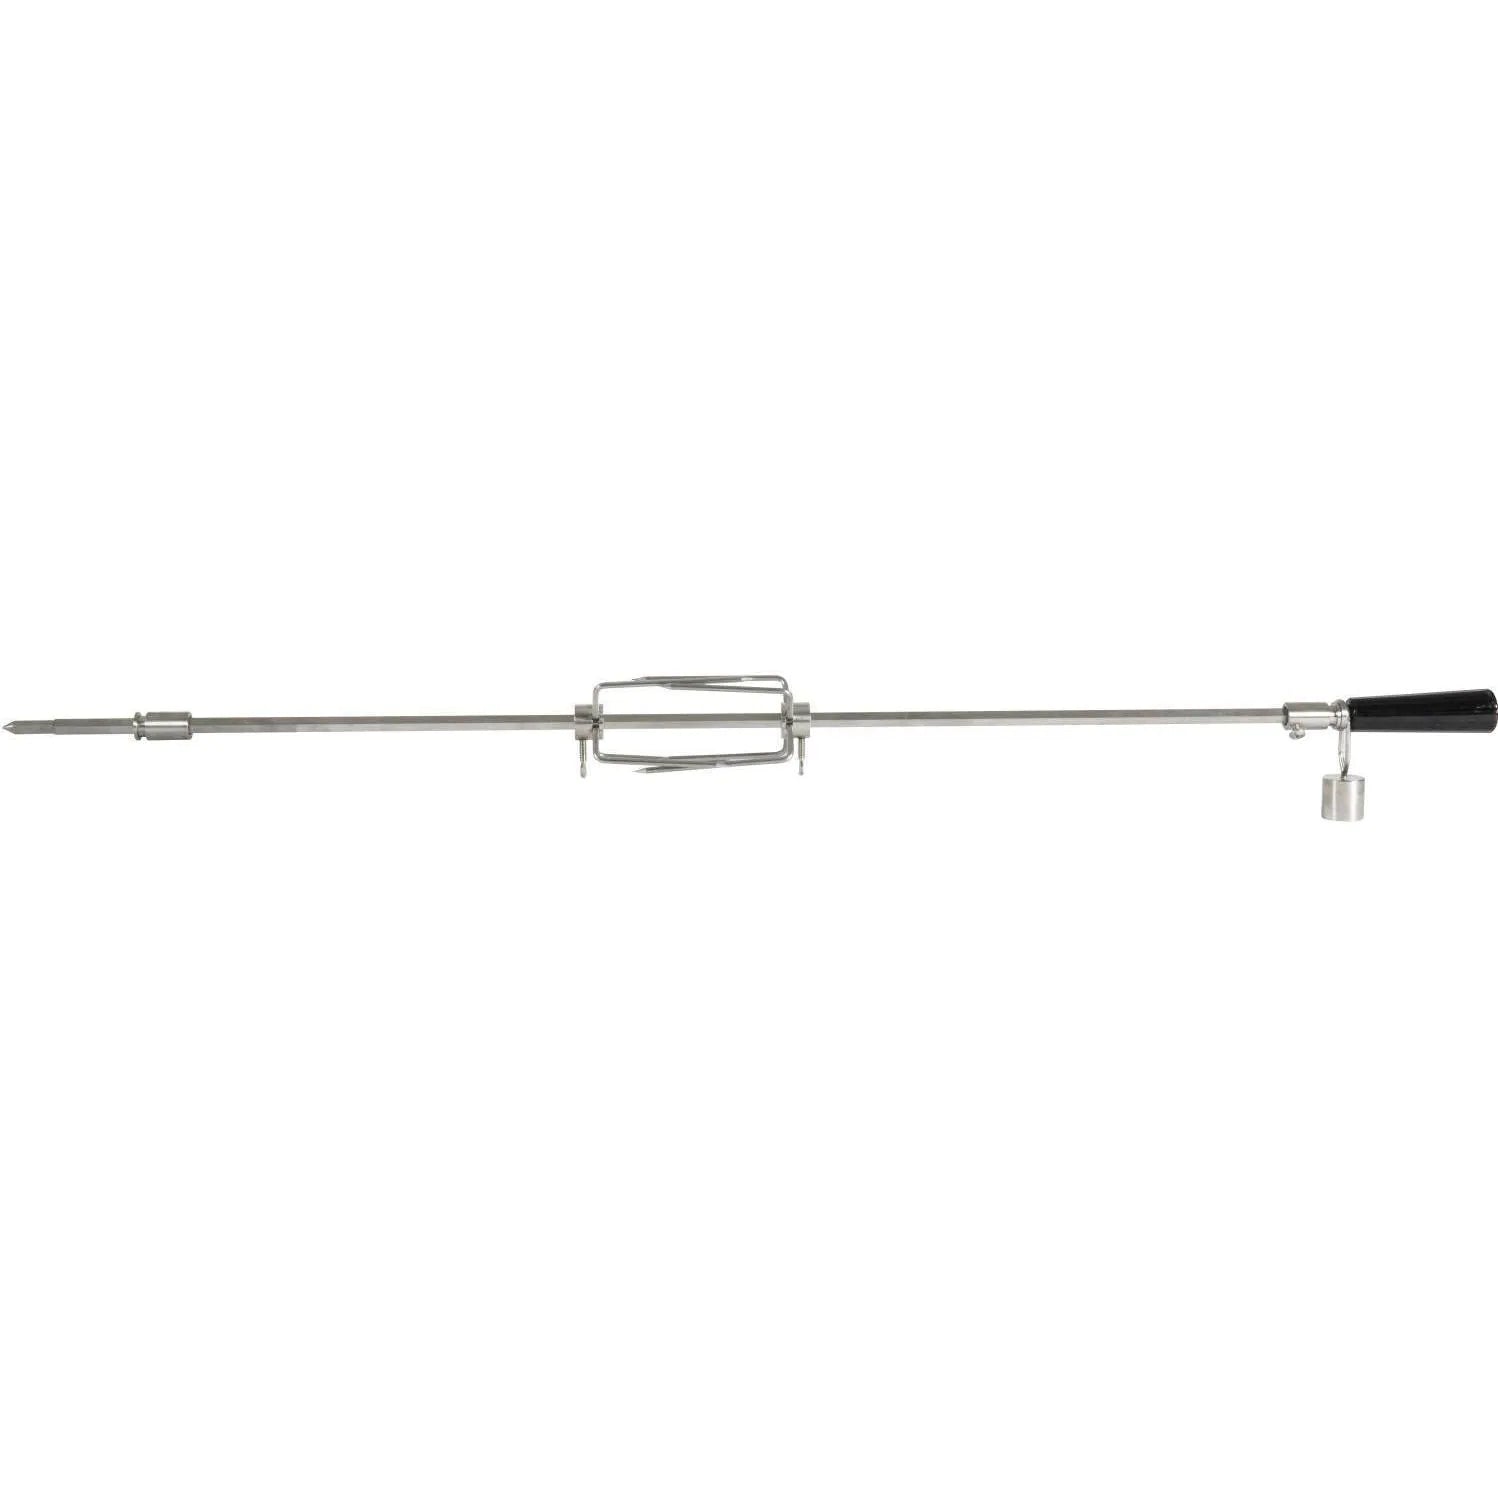 Coyote S-Series 30-Inch Built-In Gas Grill - Rotisserie Rod With Forks